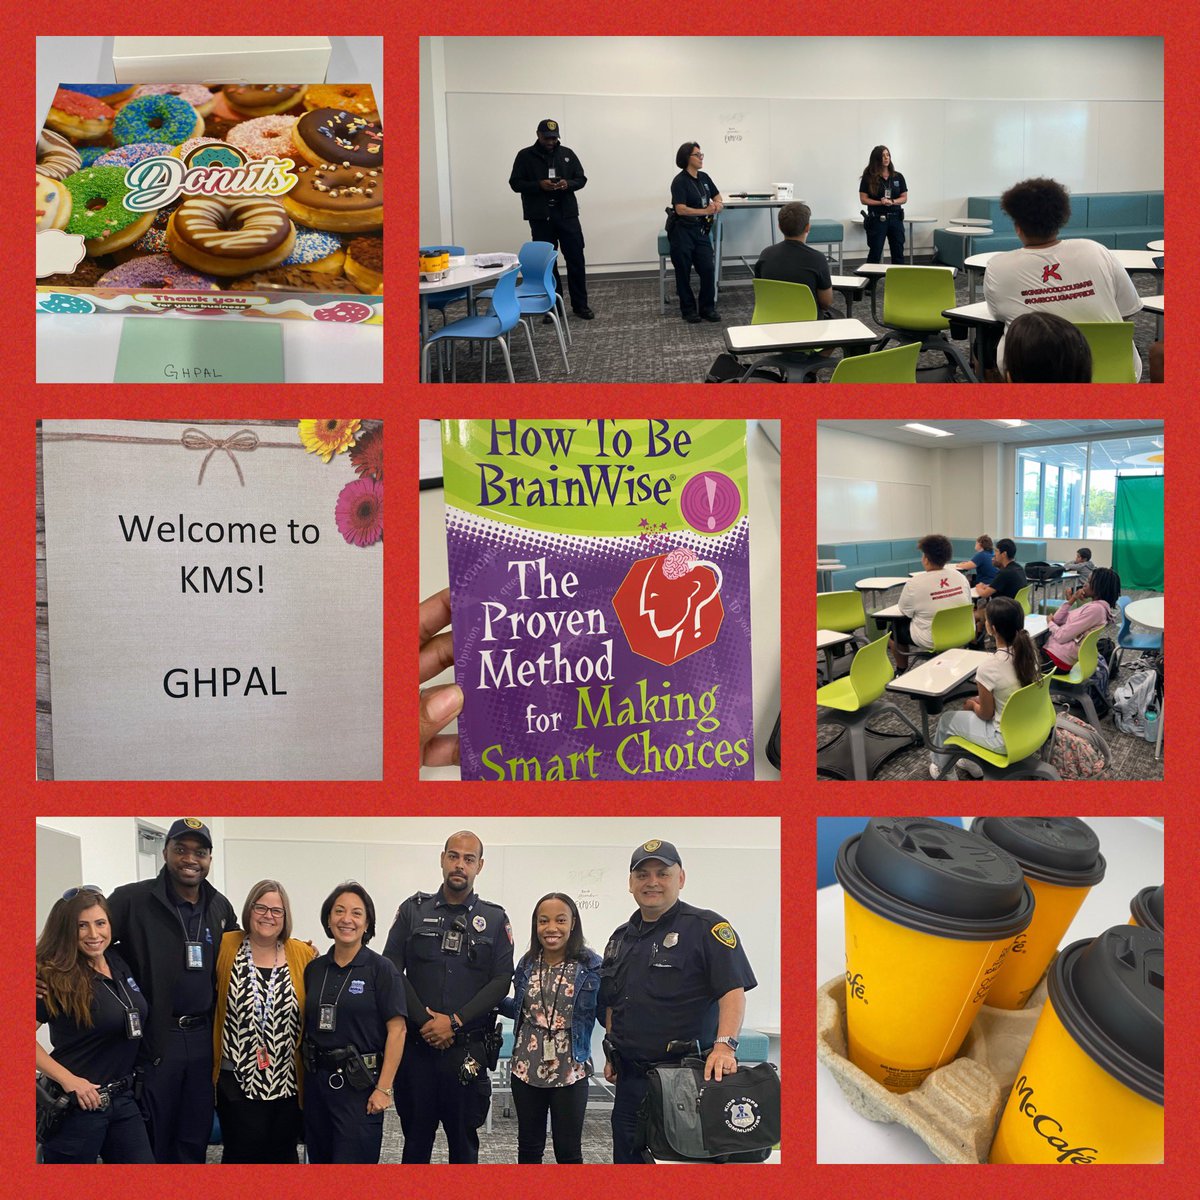 Student leaders from 6th, 7th, and 8th grade had a great time meeting with our GHPAL friends today! 🤩 Thank you to the Greater Houston Police Activities League! 🙌@GhpalMorales @GhpalBeaty @MrsSimmons_KMS @mrs_kmsconsel @cwoottie #KM